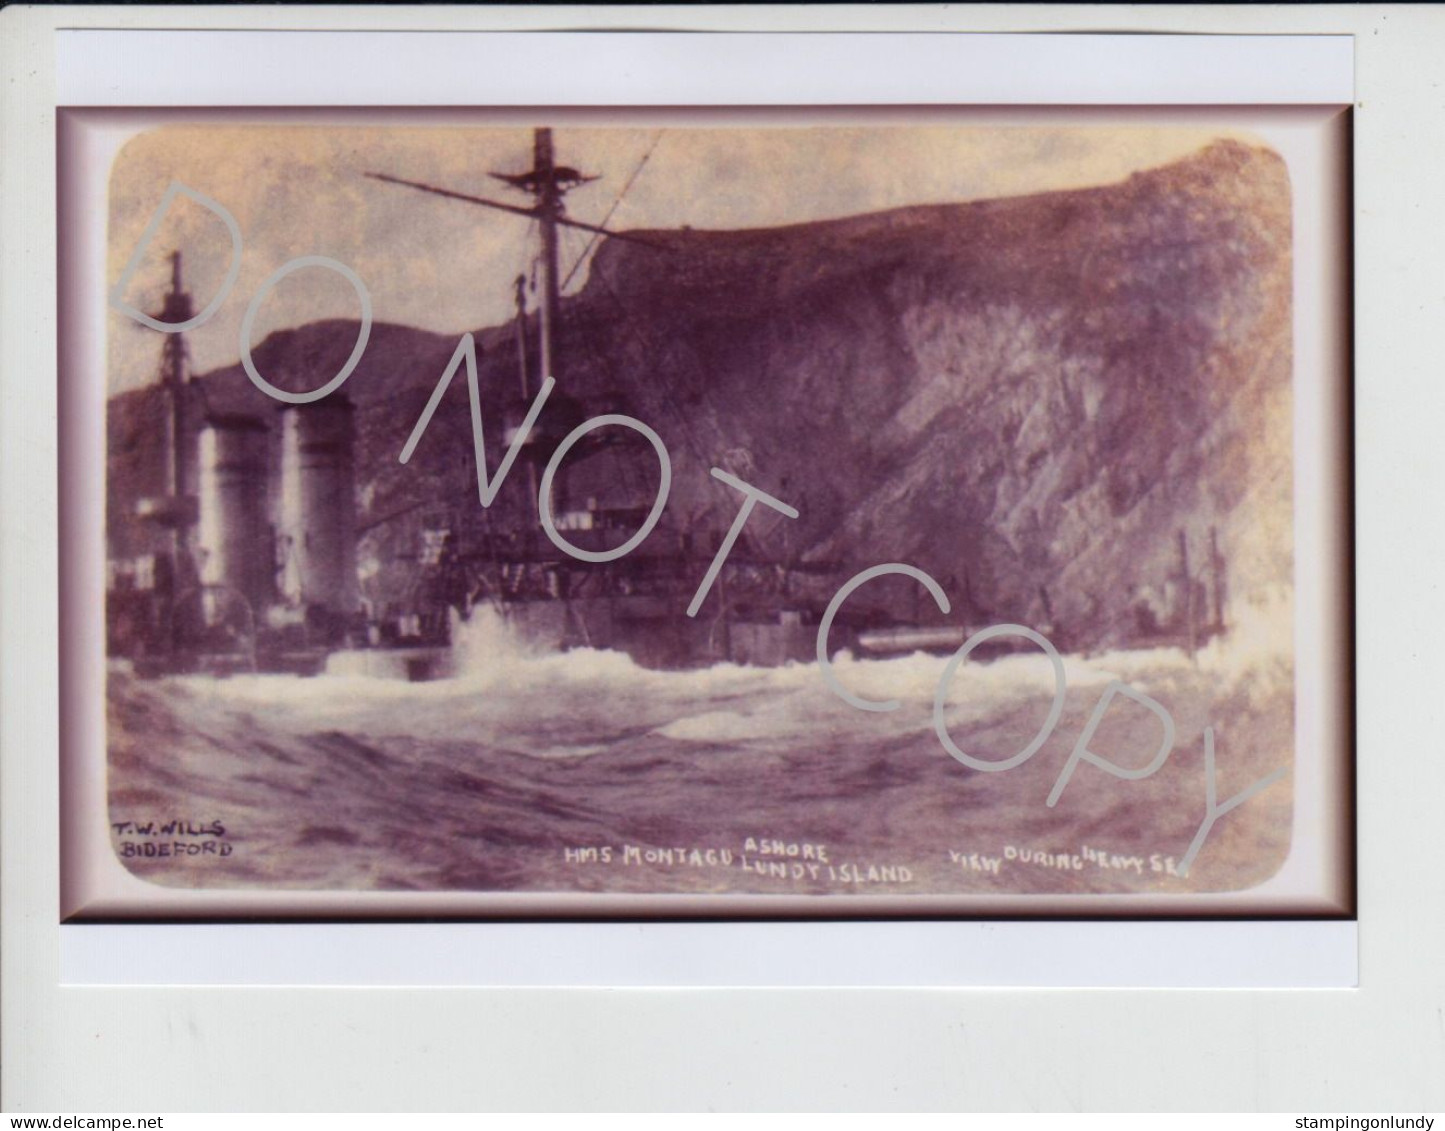 61. WI06. Four Lundy Island HMS Montague/Montagu Warship Produced By Wills Retirment Sale Price Slashed! - Oorlog, Militair